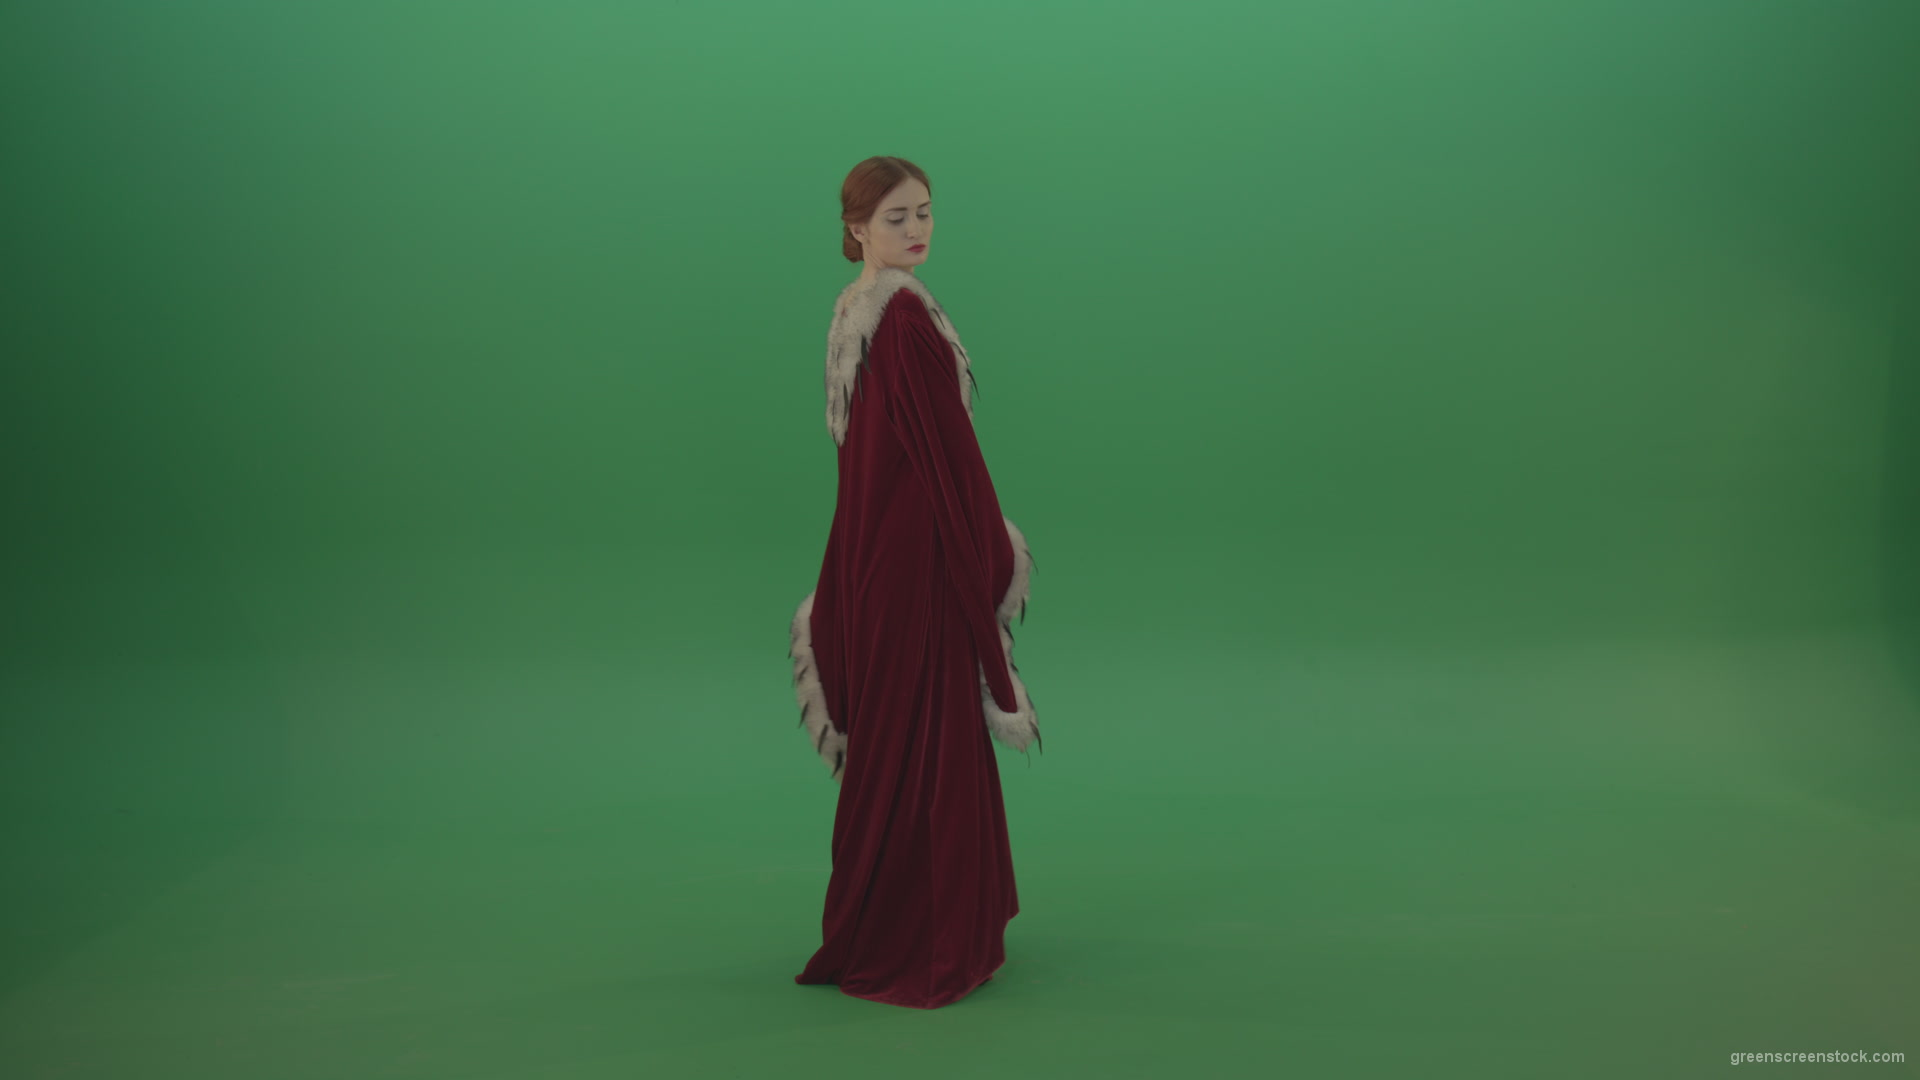 Princess-twists-around-in-a-circle-and-elegantly-dances_005 Green Screen Stock